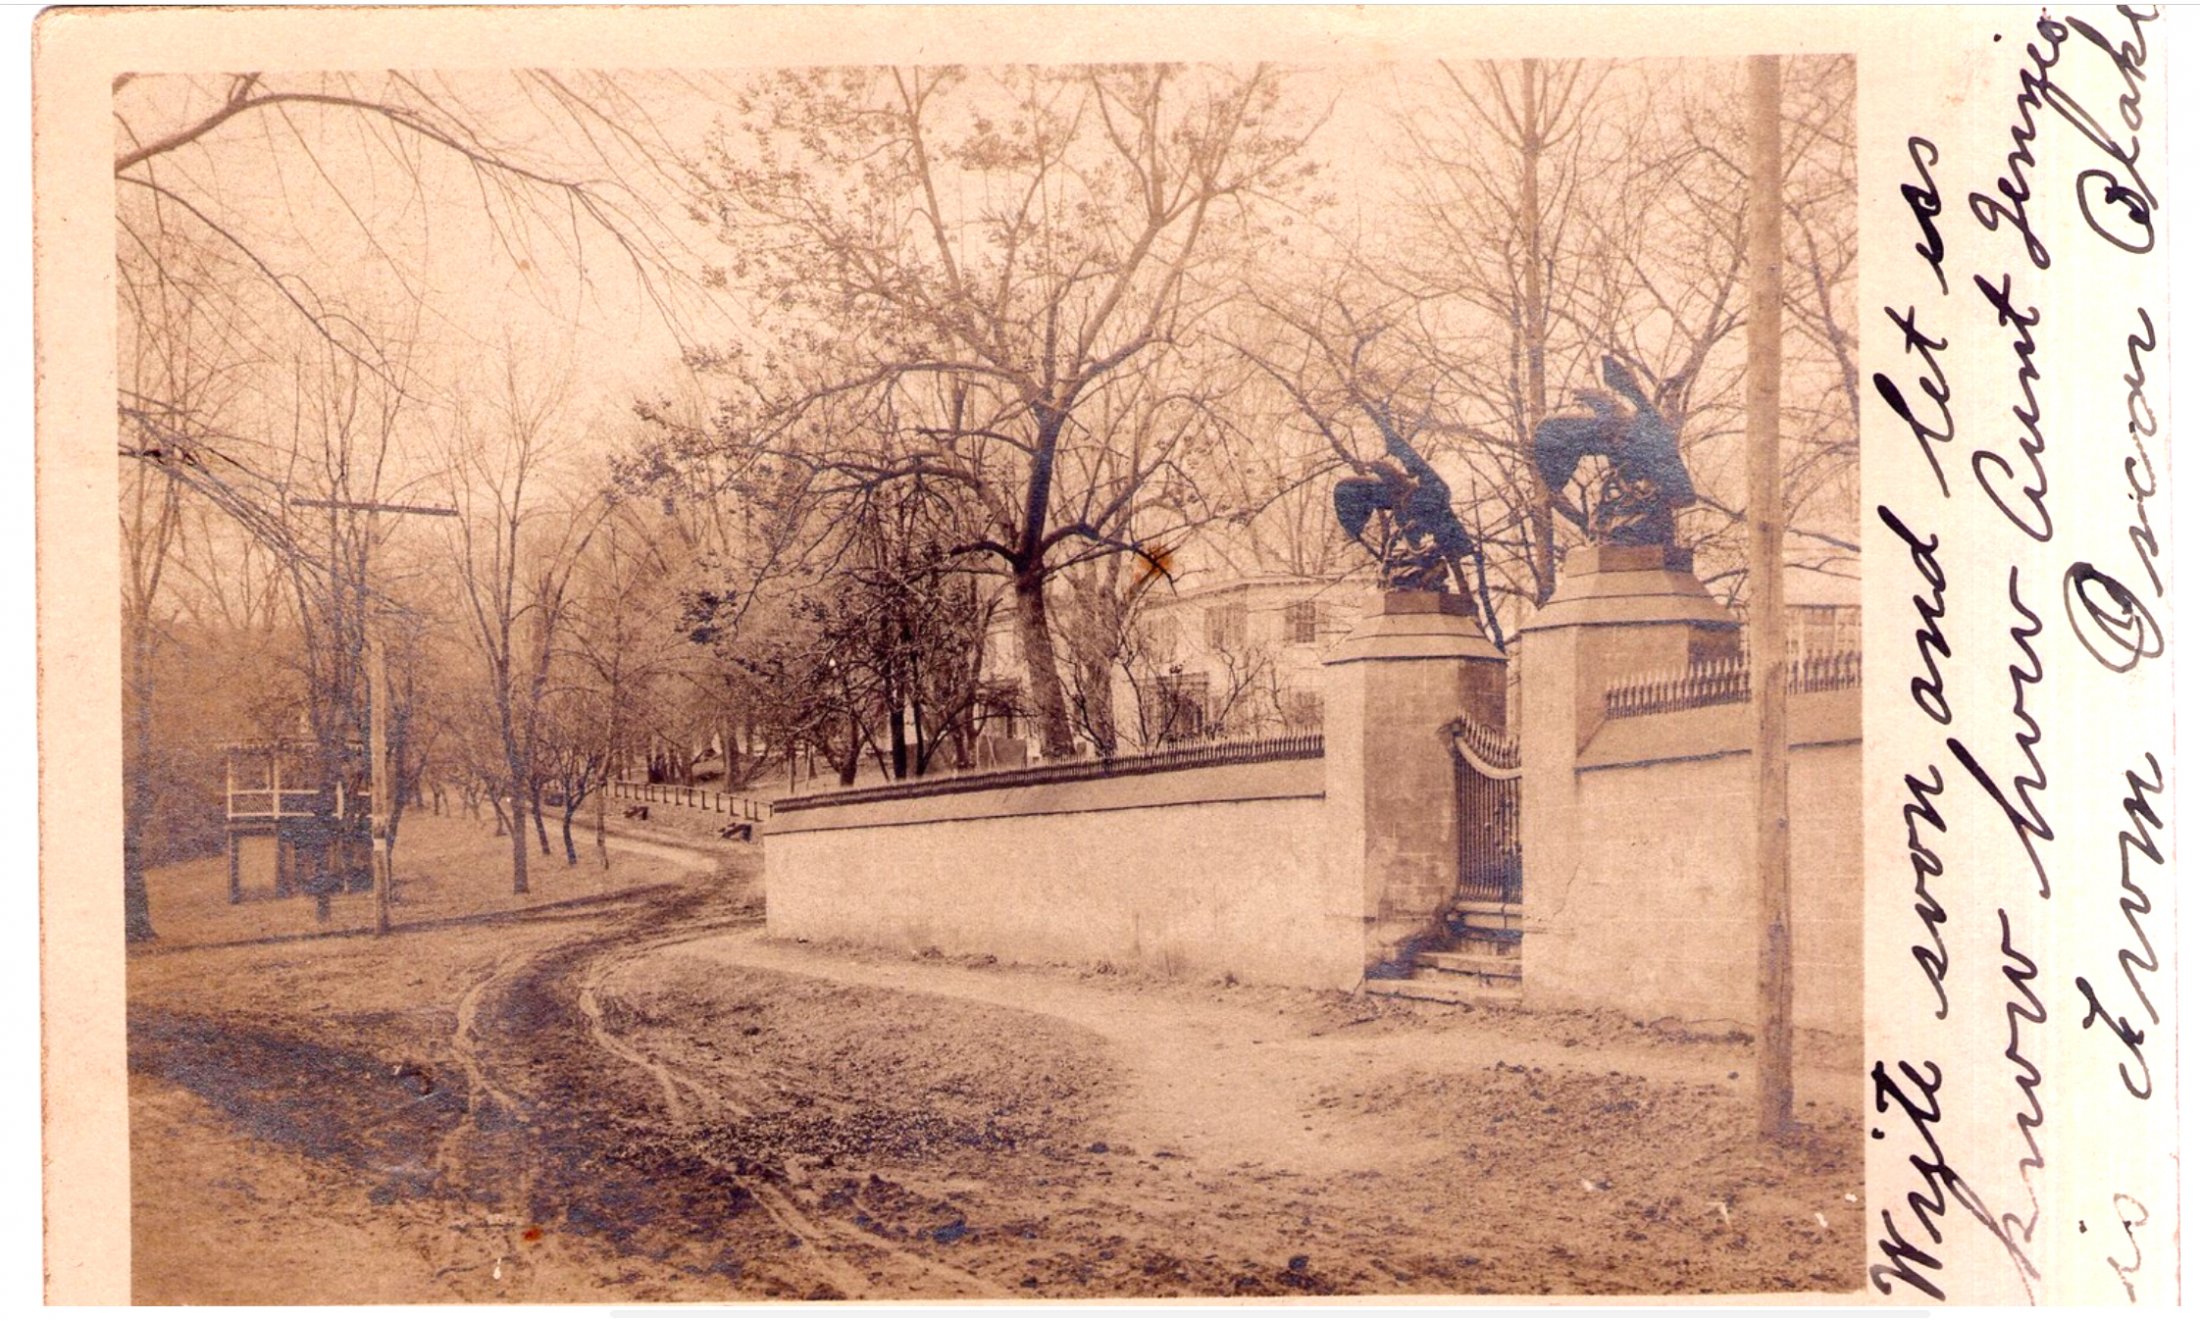 Smithville - Gates and road - c 1910